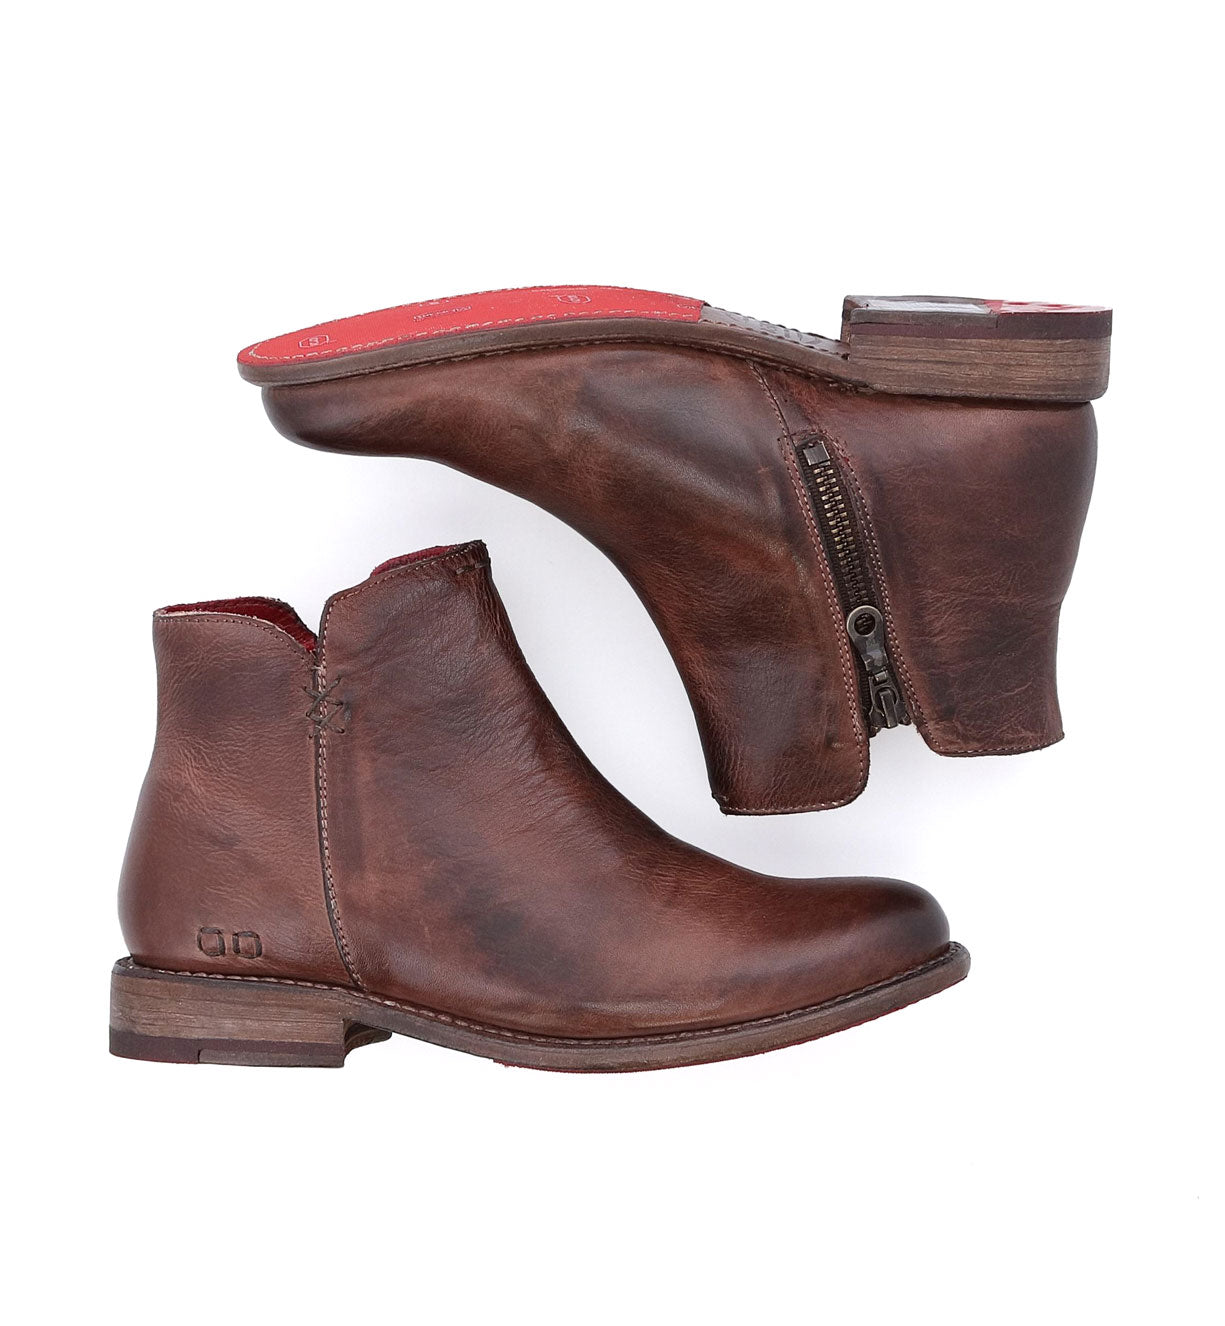 A pair of Yurisa teak leather ankle boots with red soles by Bed Stu.